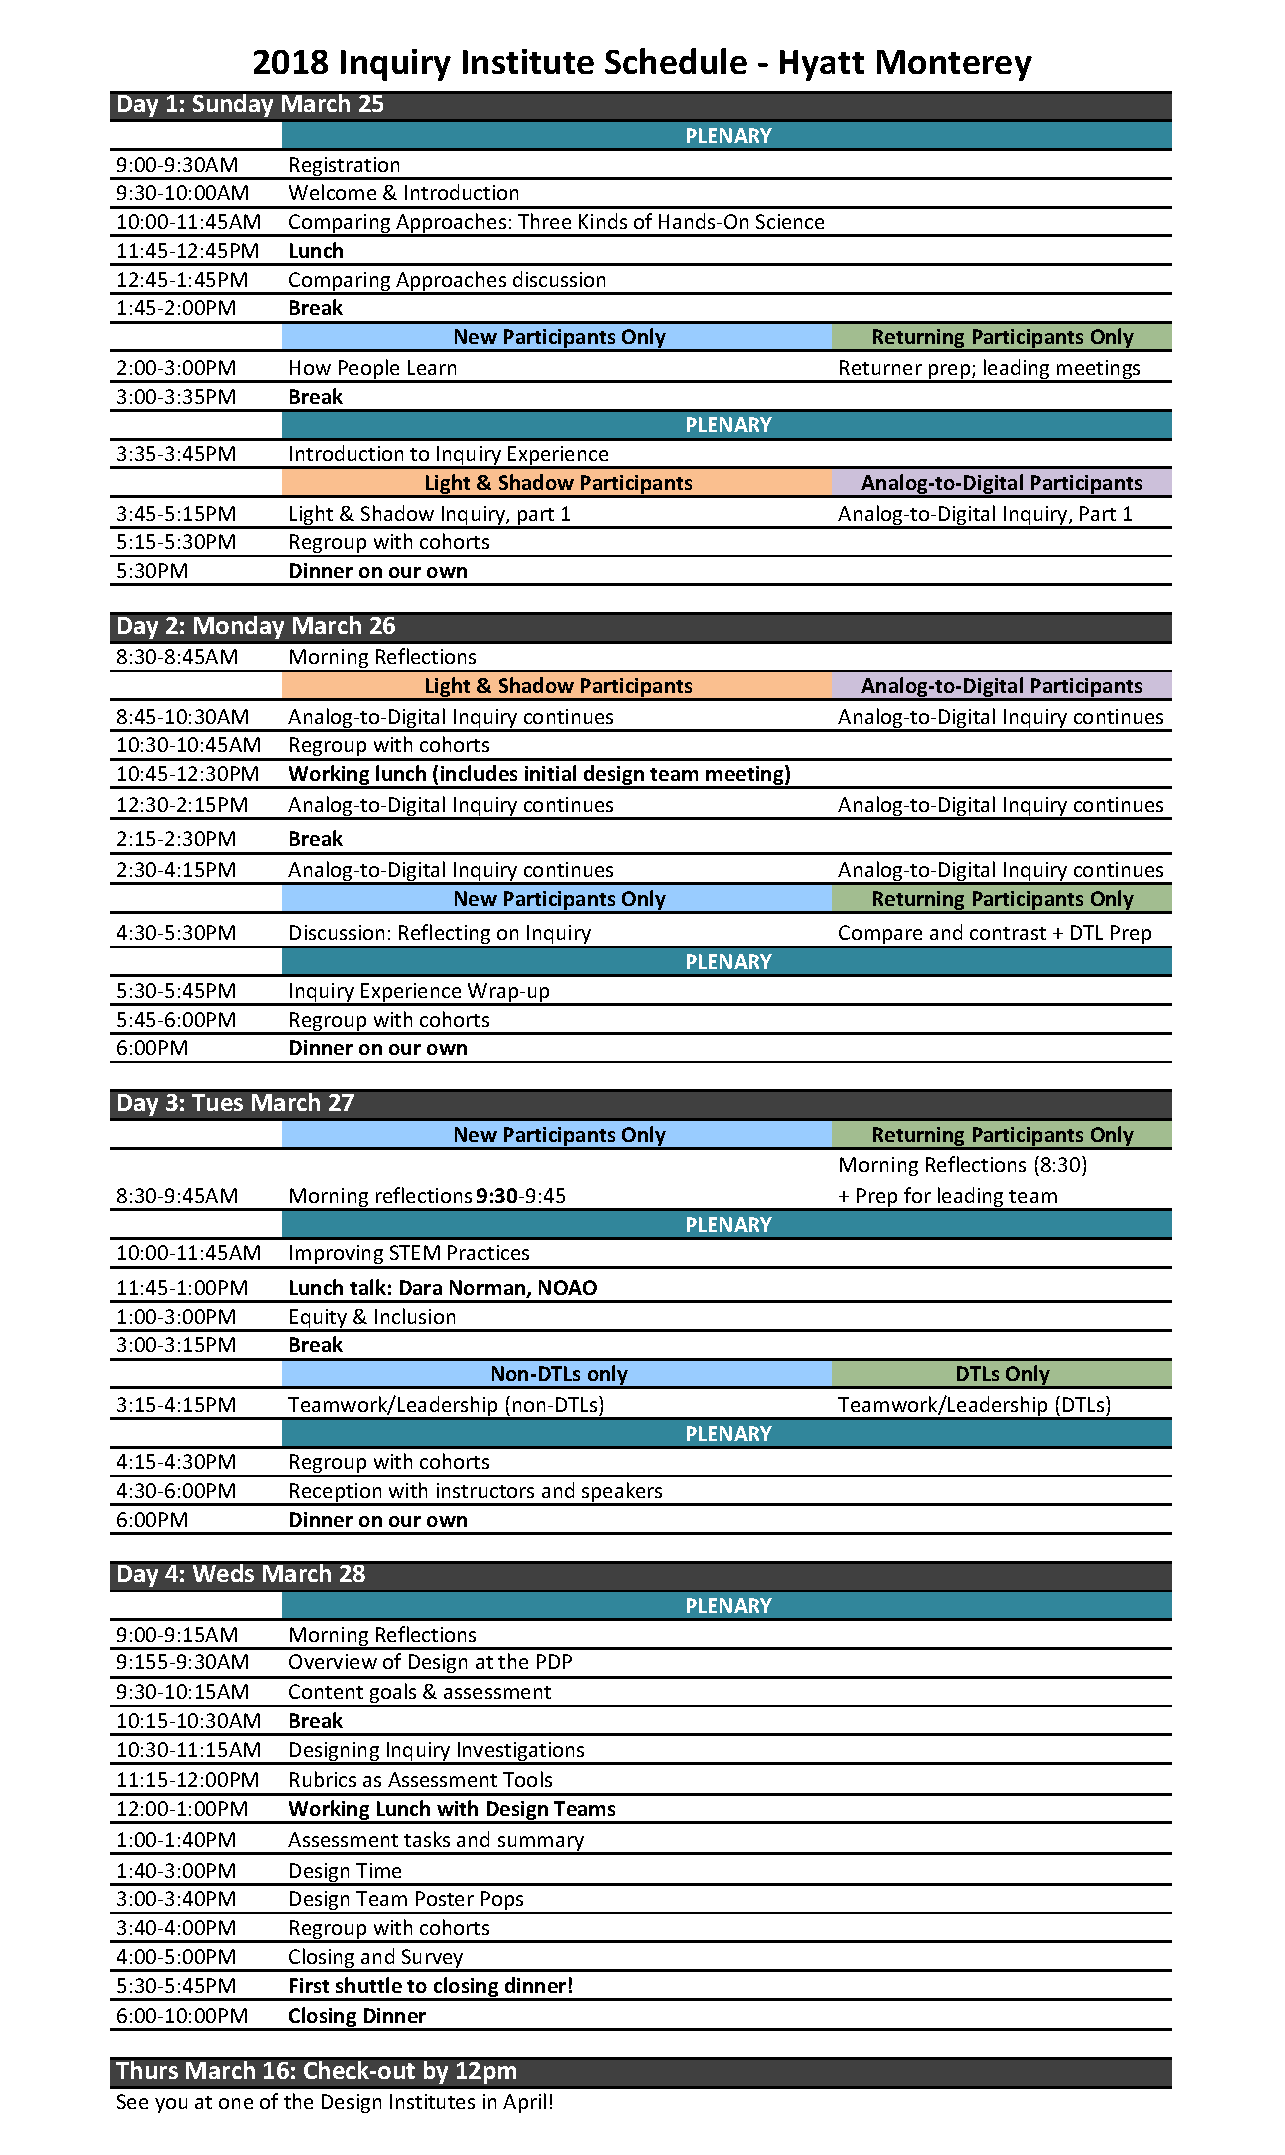 2018_inqinst_agenda-at-a-glance.web.png